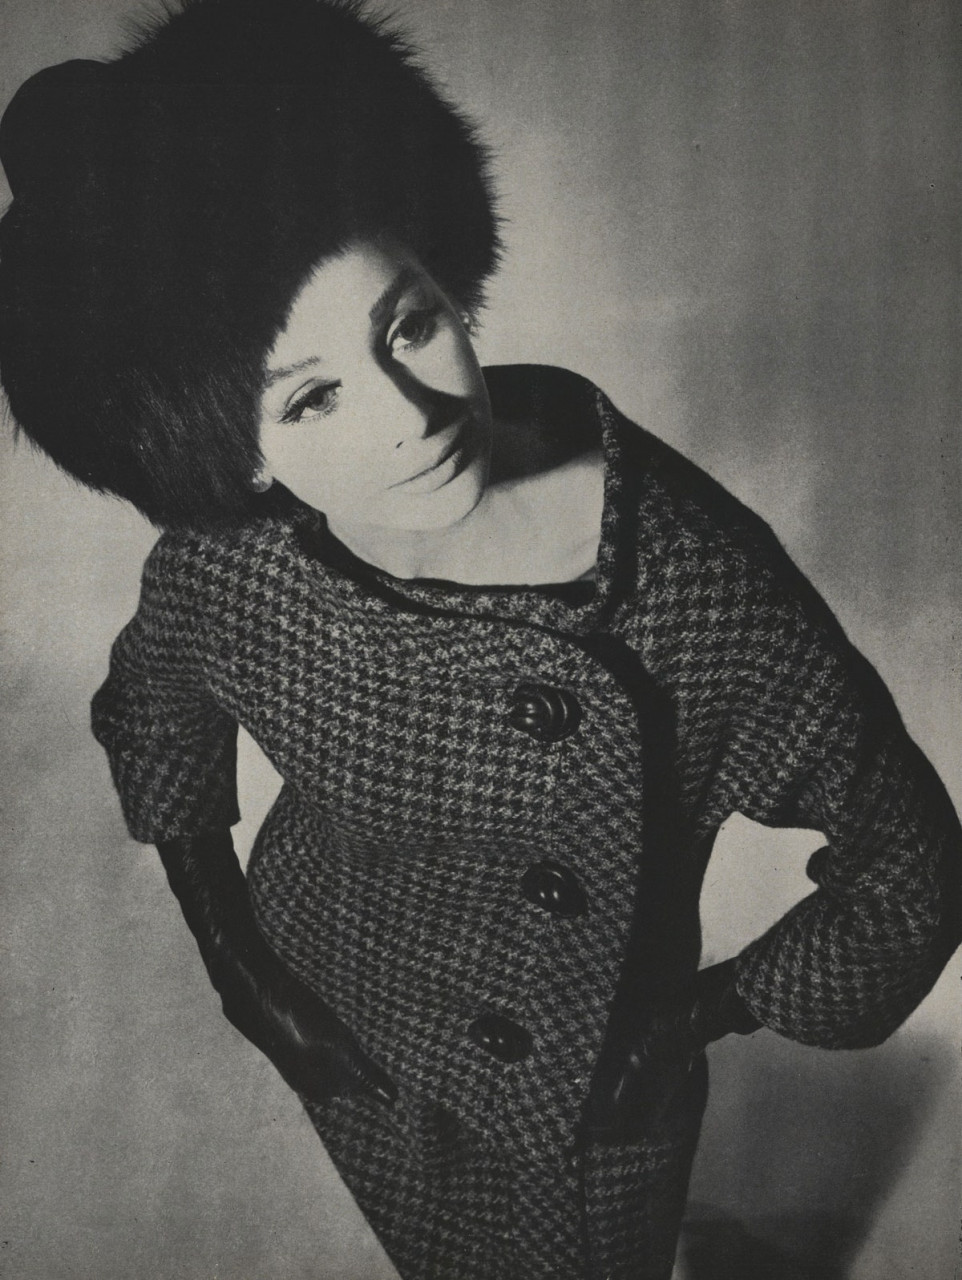 Pierre Cardin tweed suit by Irvin Penn, September 1961. – Pic from Vogue Magazine